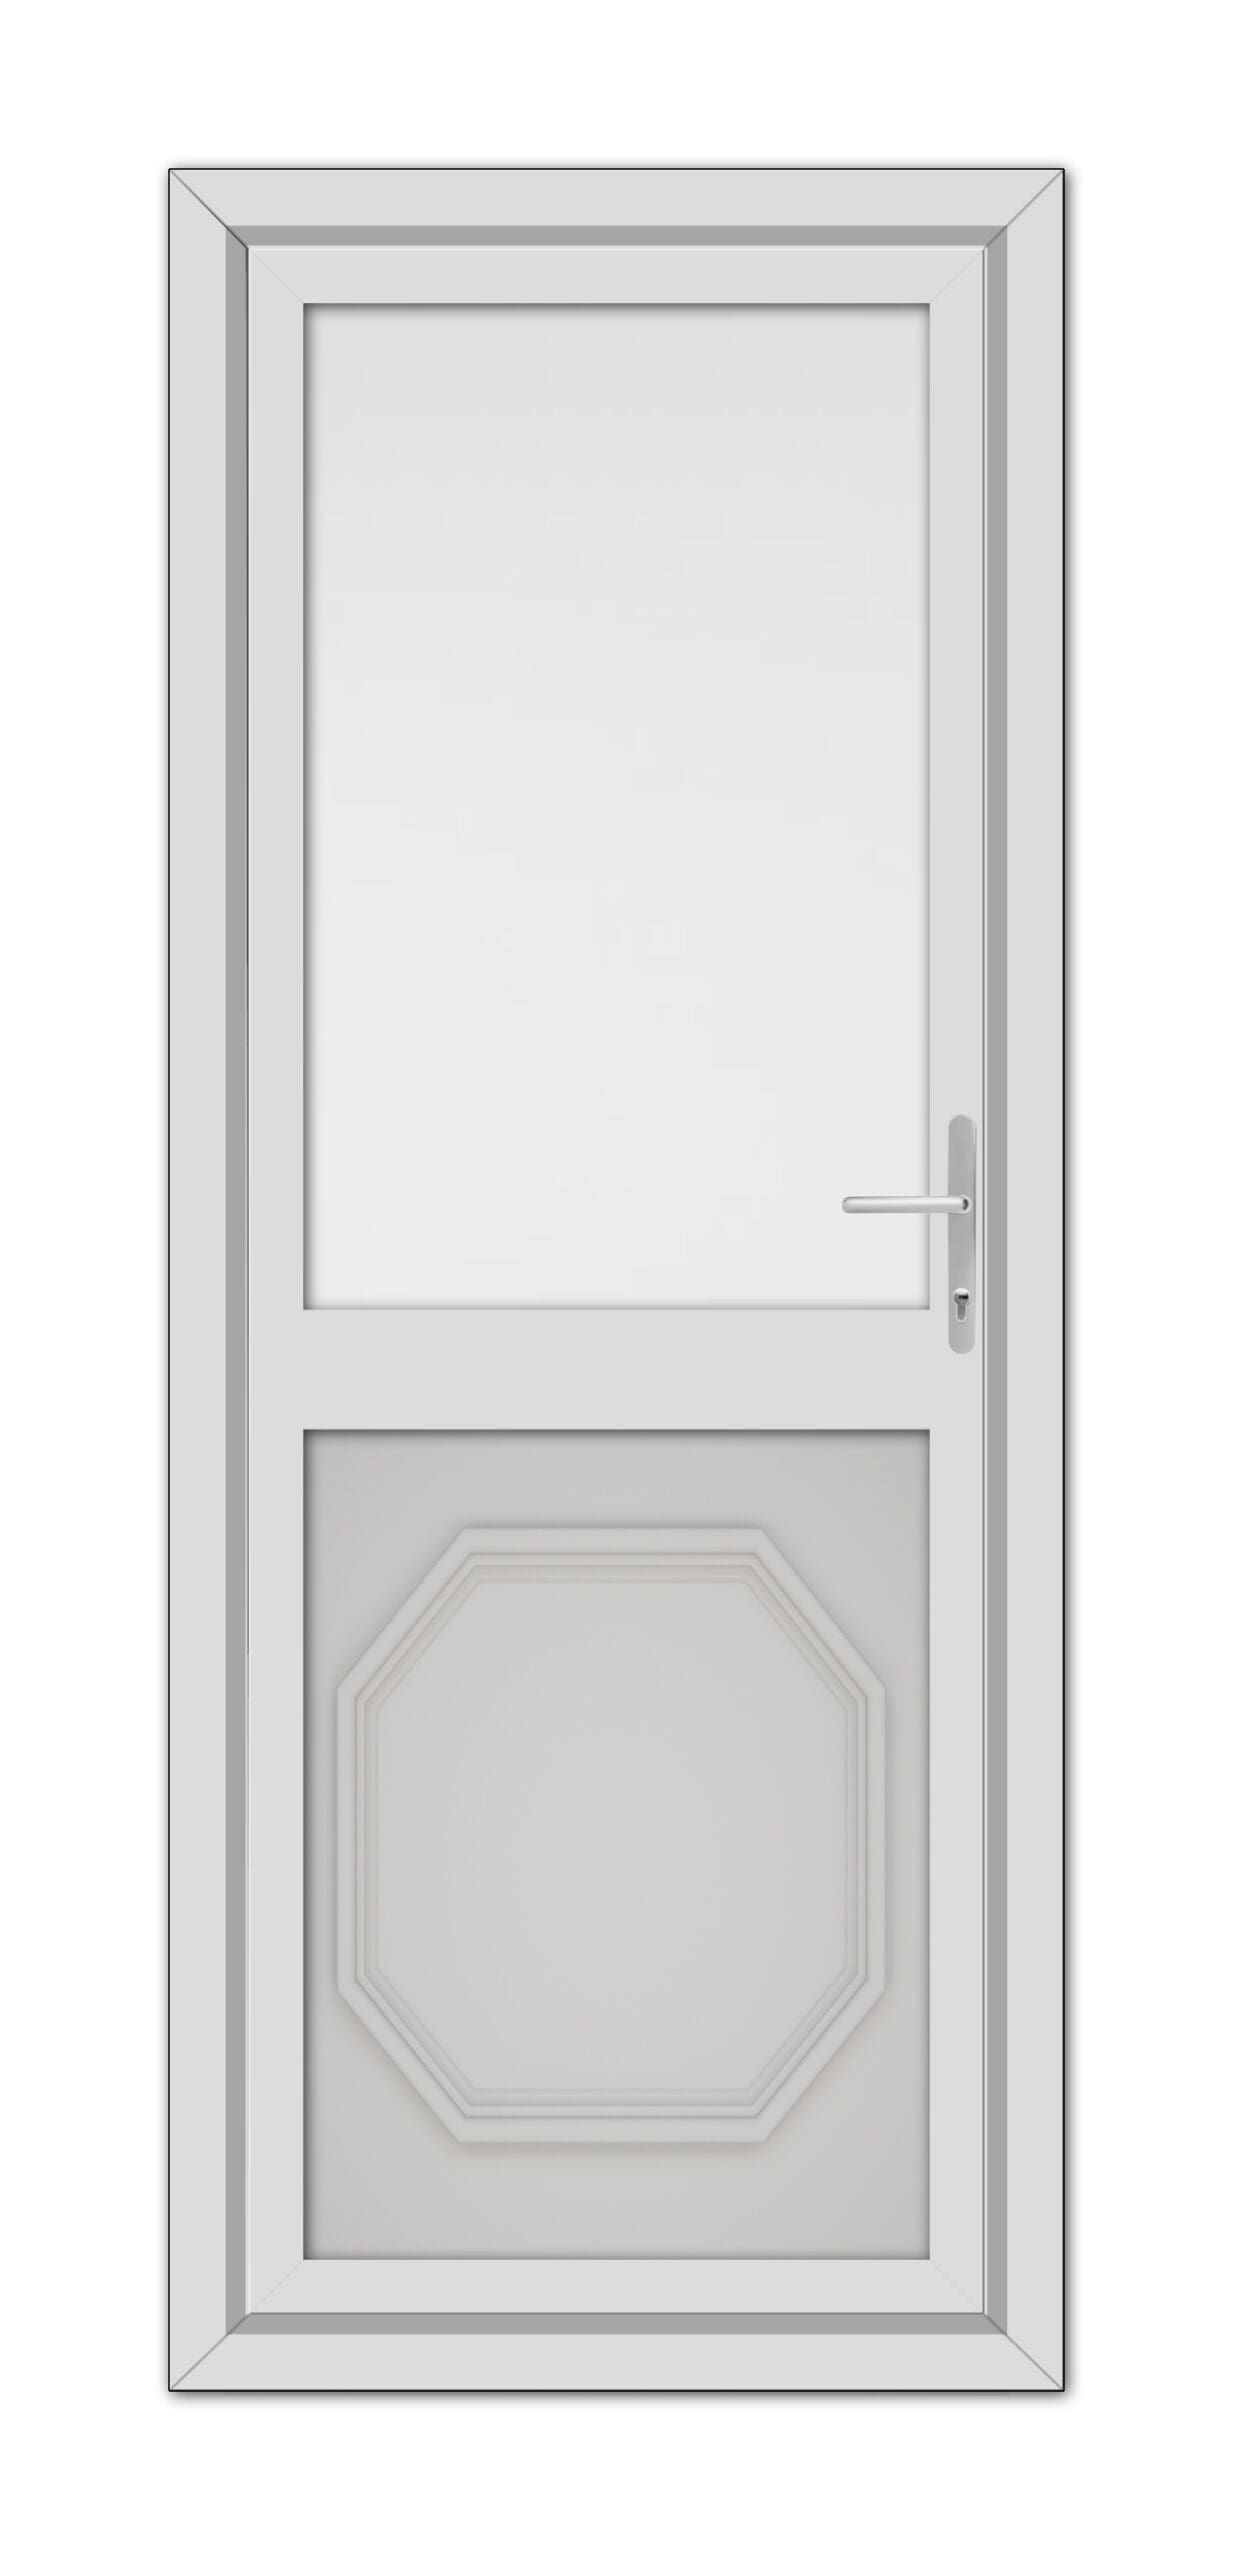 A closed modern white Silver Grey Buckingham Half uPVC Back Door featuring a small square window at the top and an octagonal design at the bottom, with a silver handle on the right side.